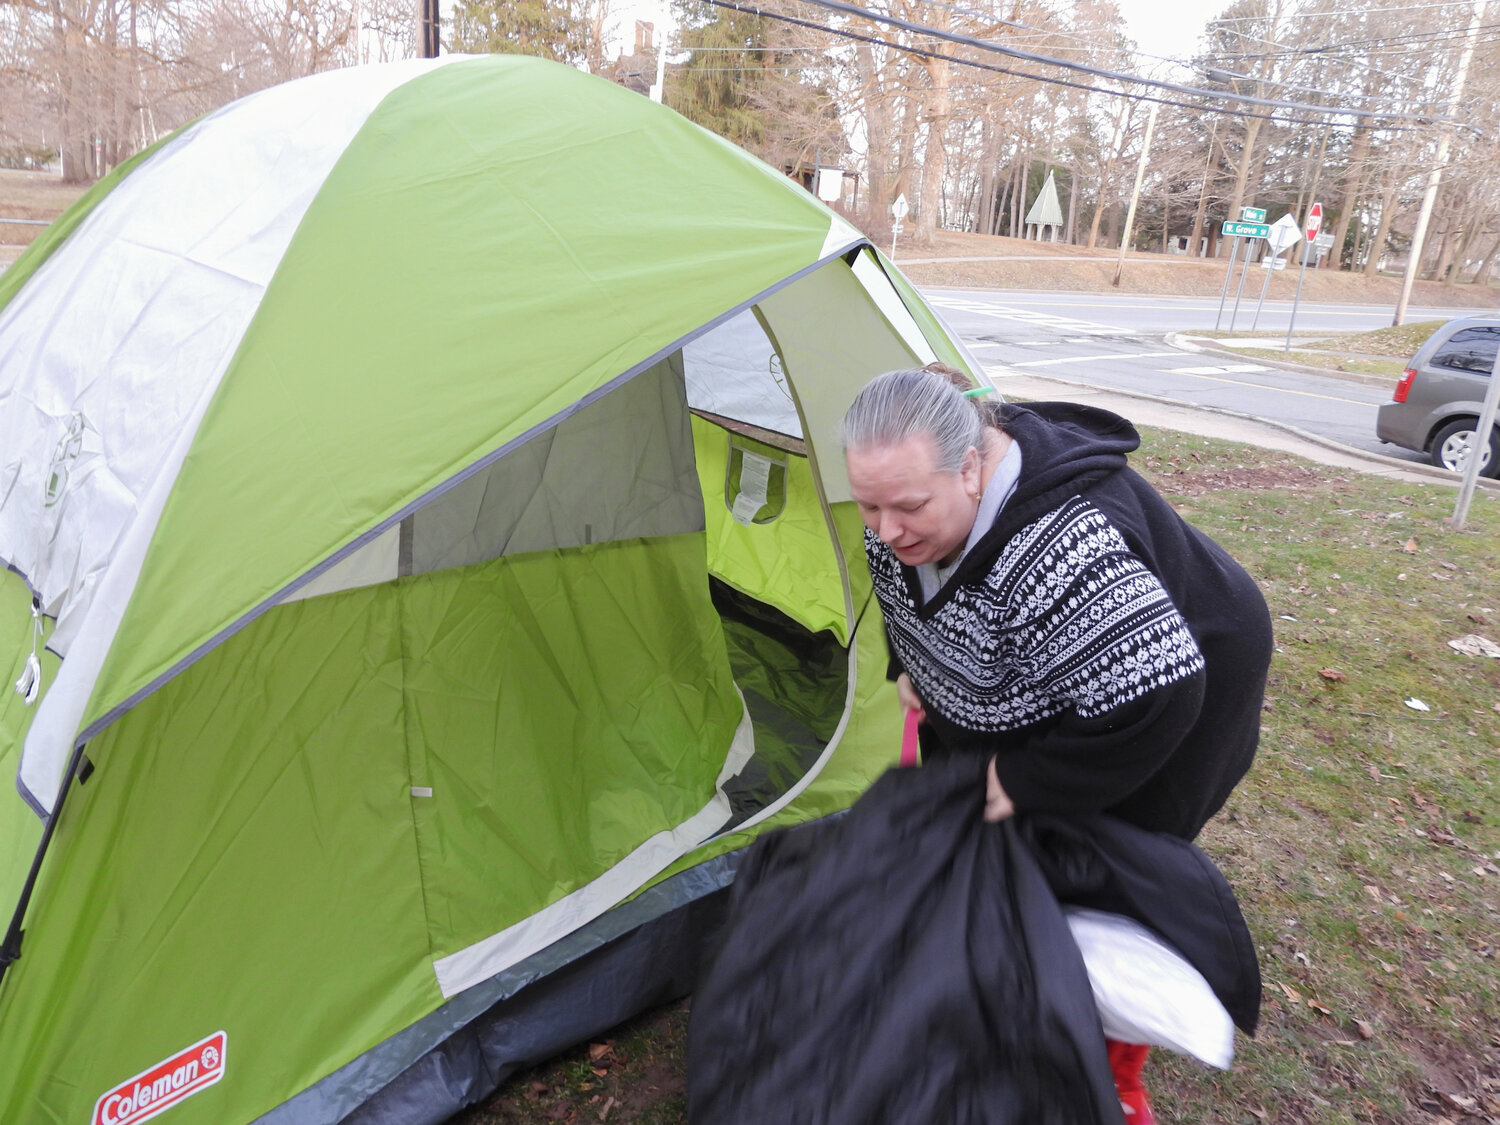 Karing Kitchen Coordinator Melissa King finishes setting up her tent and gathers up a few blankets for her homelessness awareness sleep-out